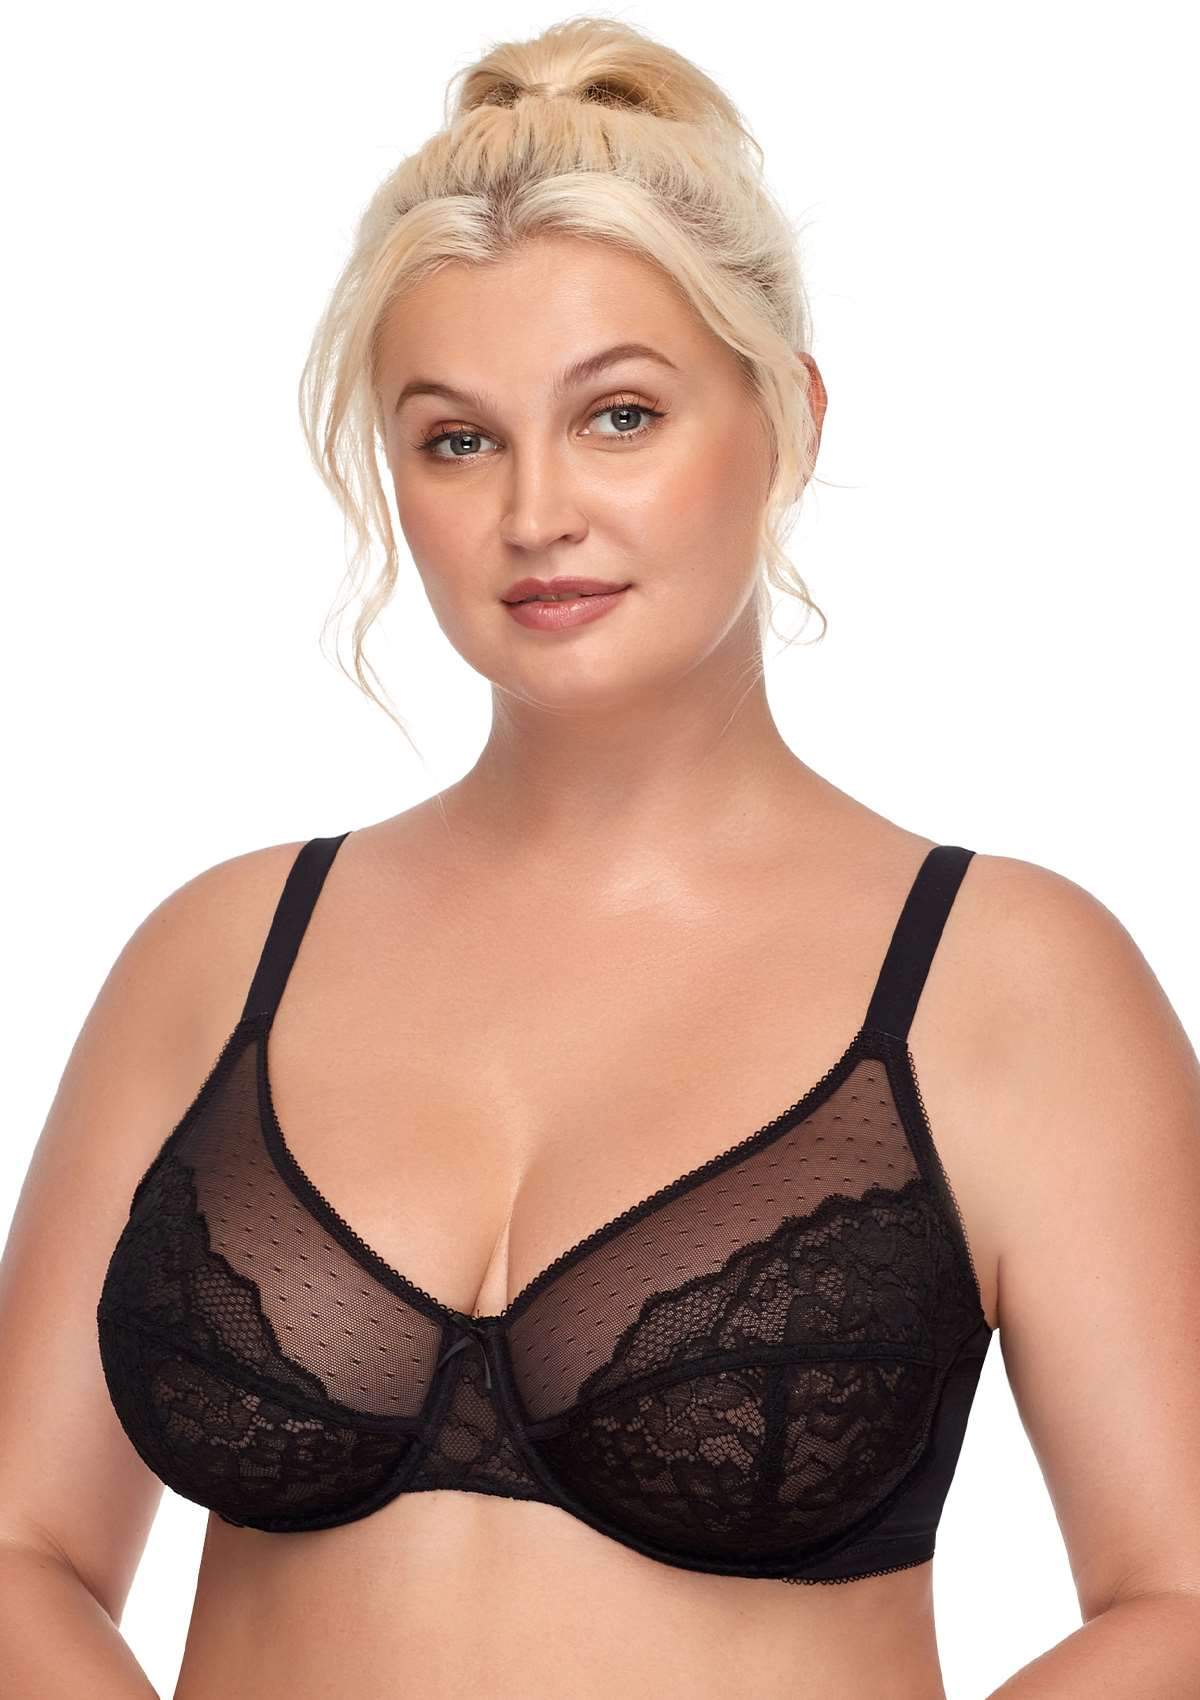 HSIA Enchante Lace Wire Bra For Lifting And Separating Large Breasts - Black / 42 / DDD/F